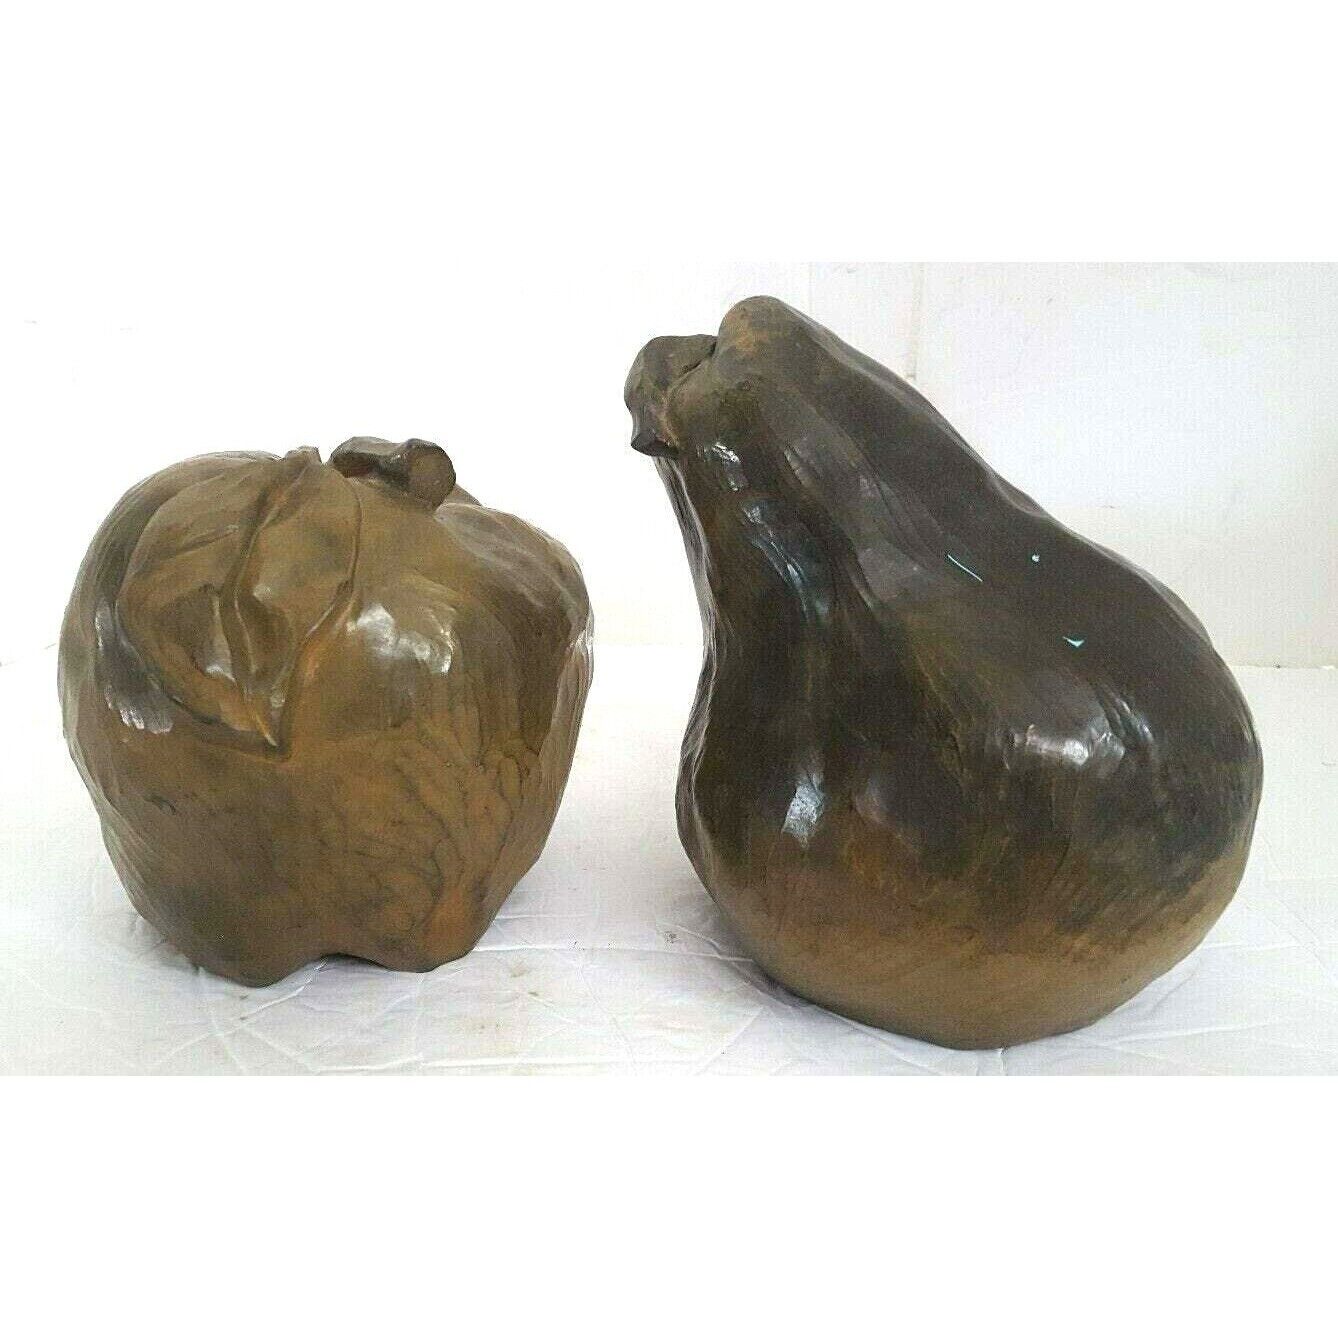 Vintage Sculpture 1996 Apple Pear Still Life by Paul Strauch